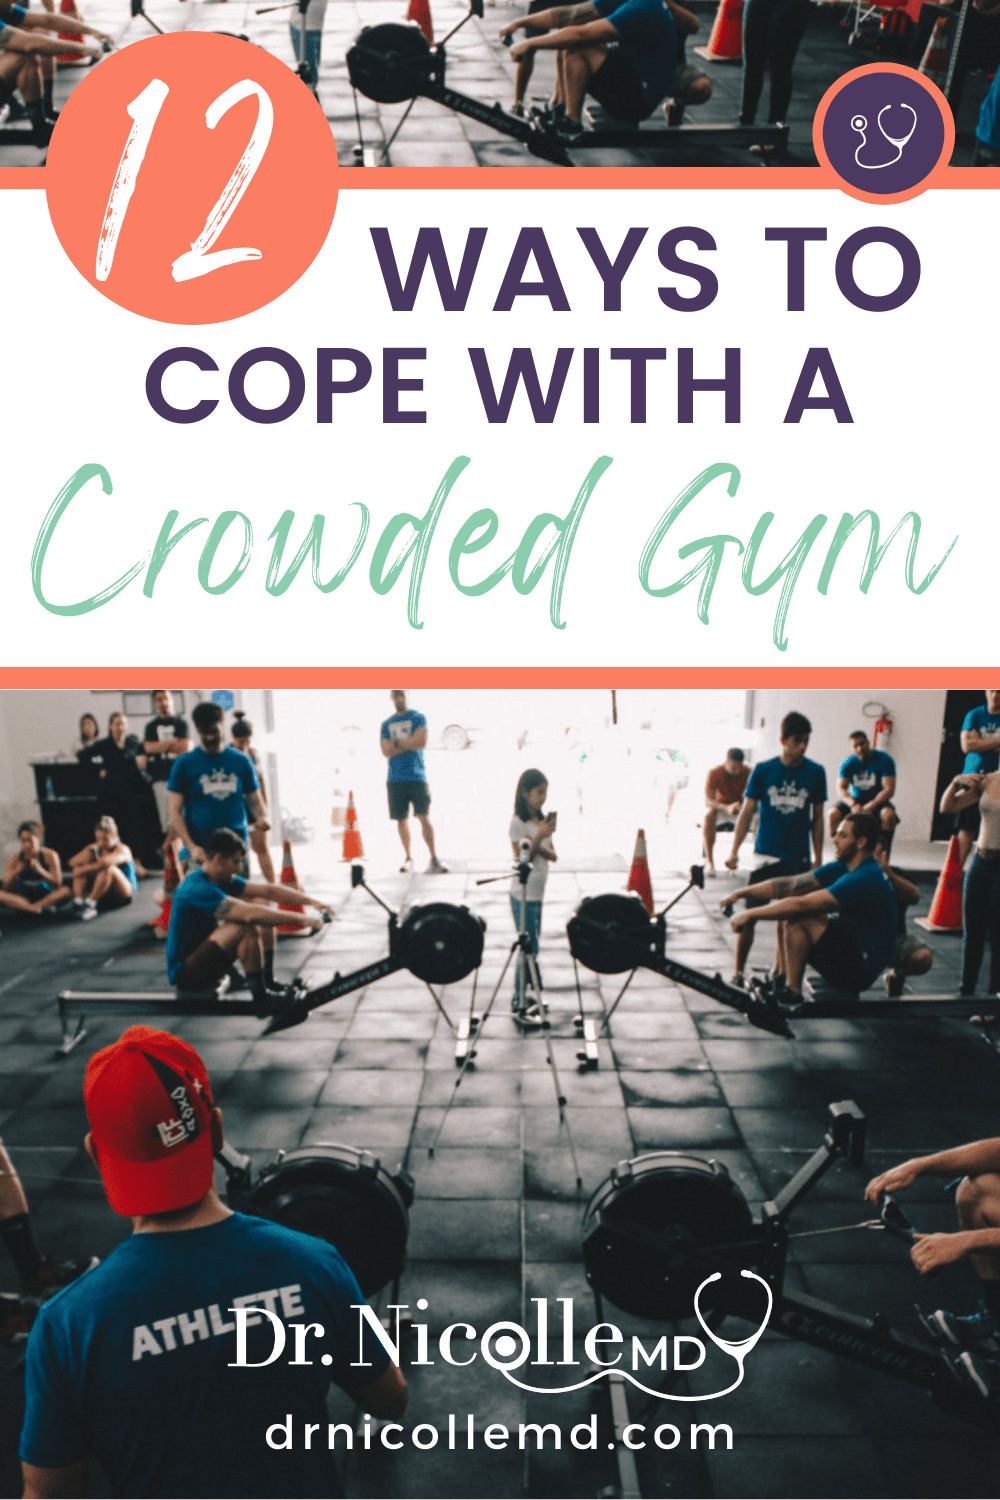 12 Ways to Cope With a Crowded Gym